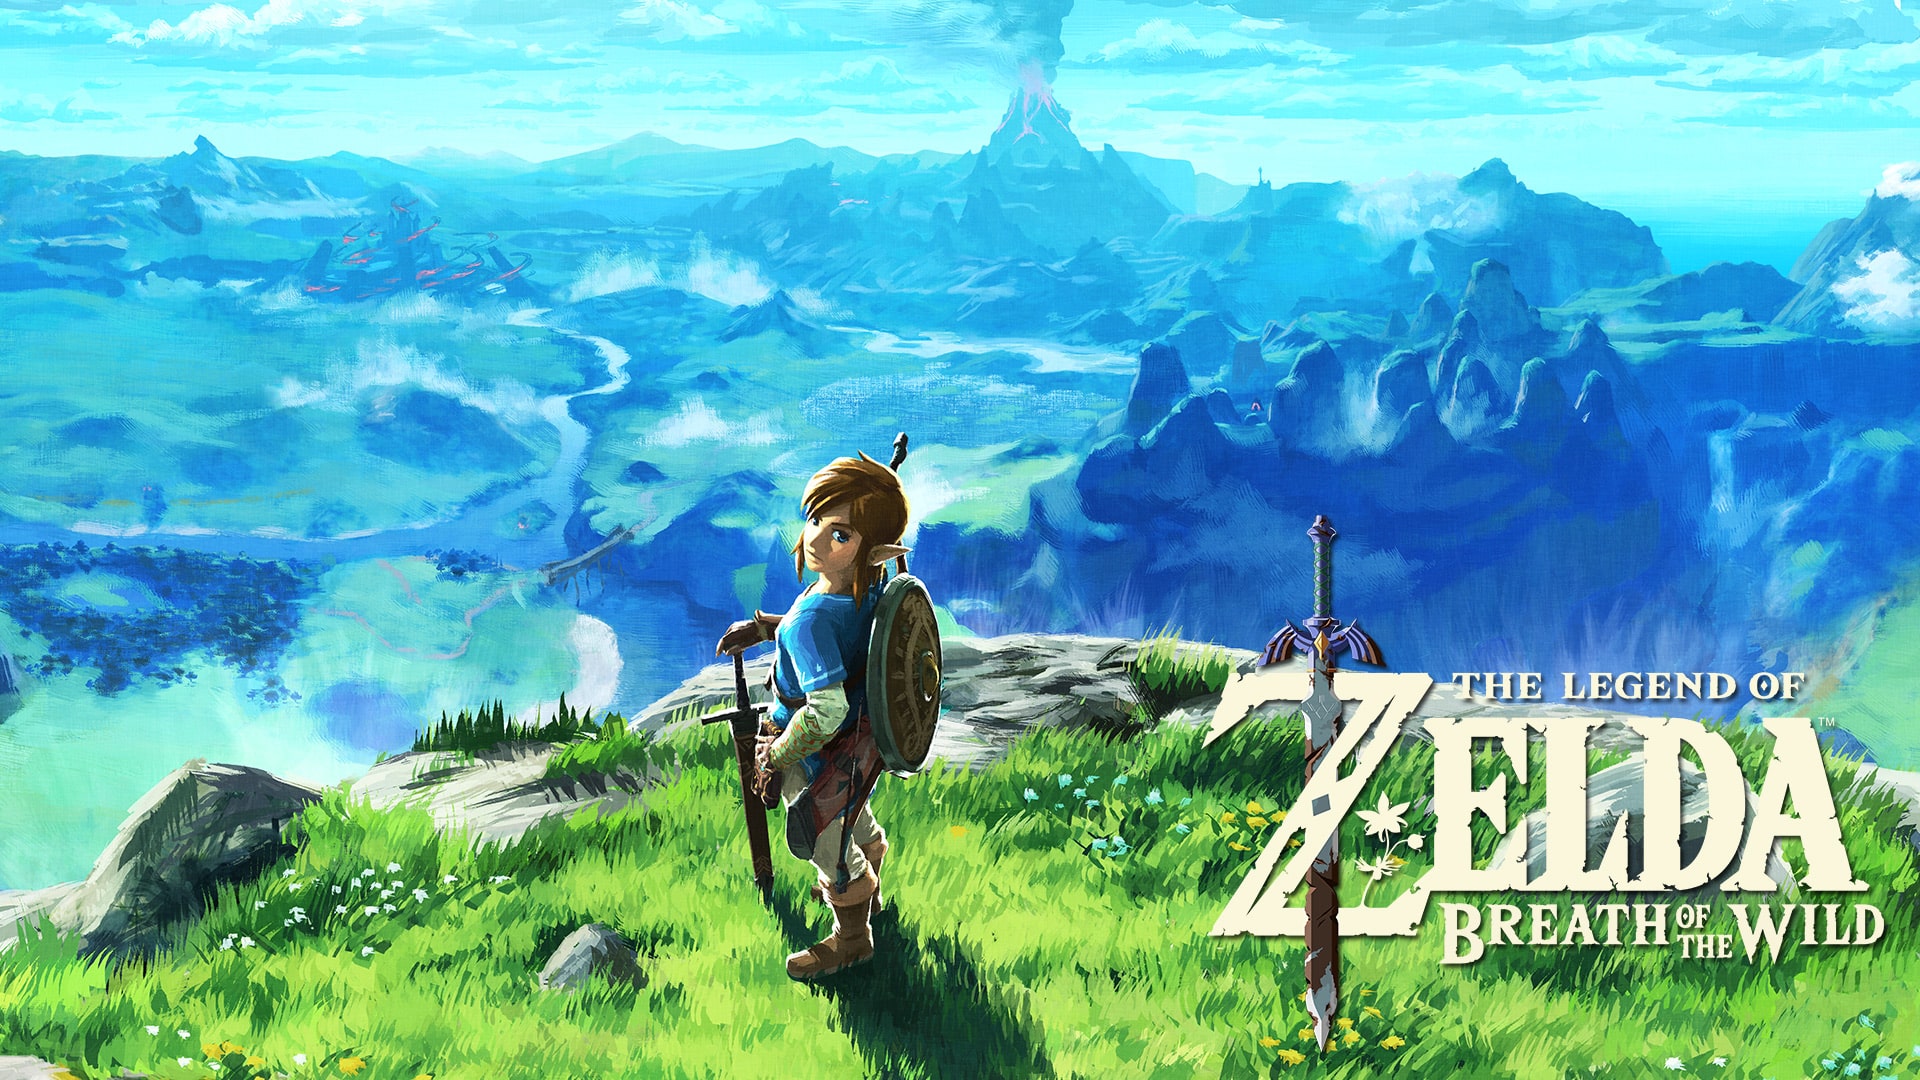 The Legend of Zelda: Breath of the Wild: The Movie